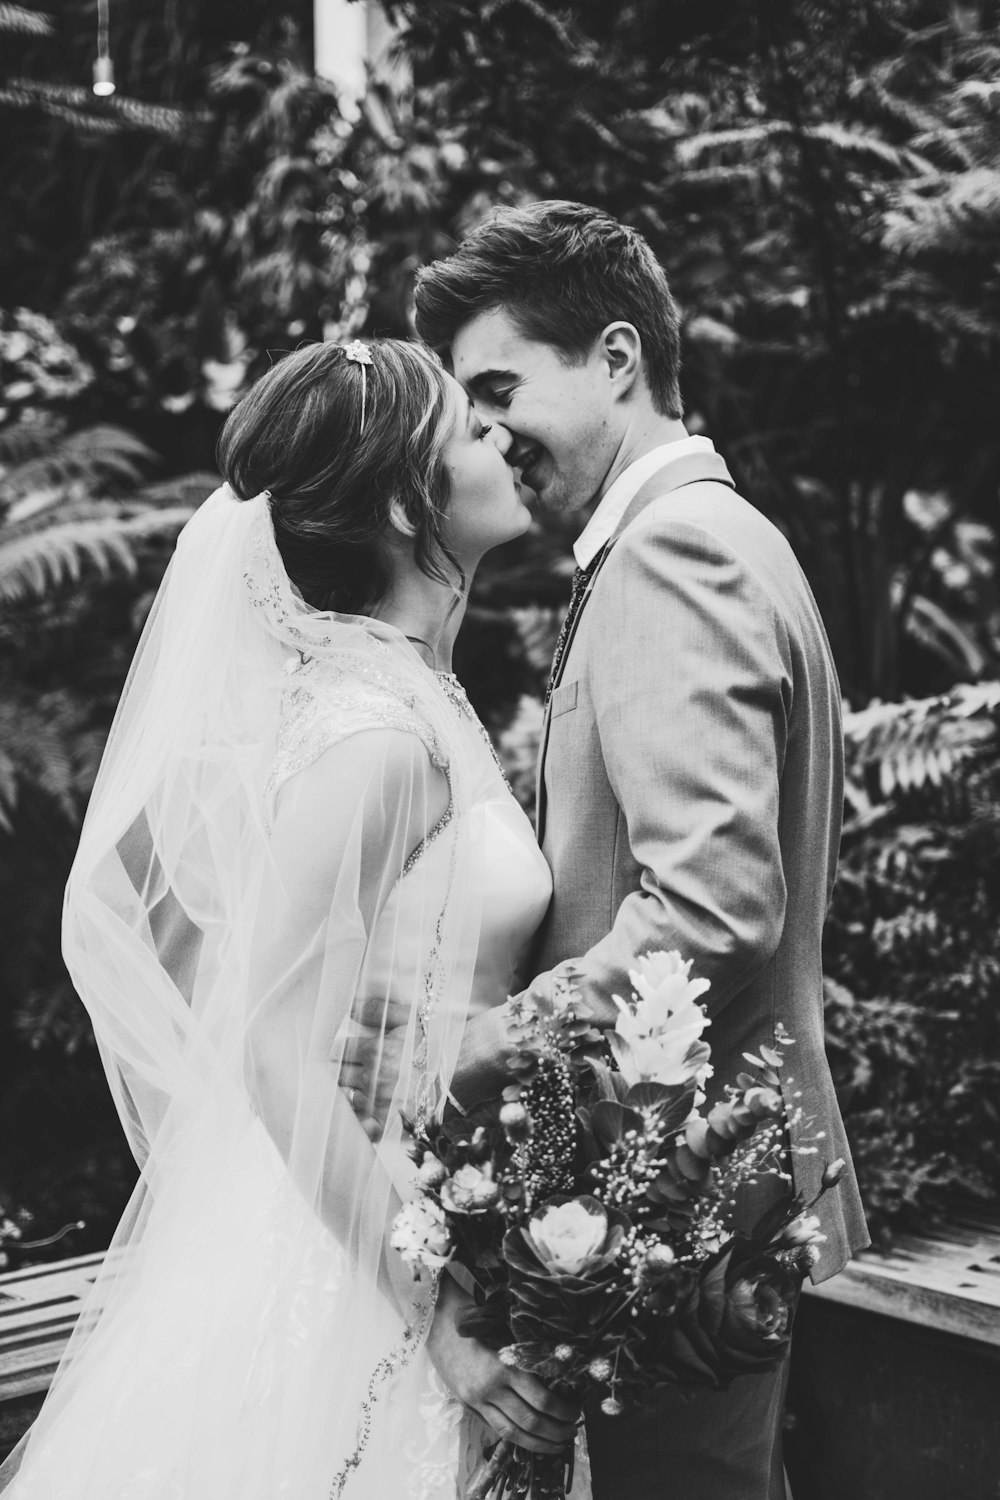 grayscale photo of couples kissing and wearing wedding dress